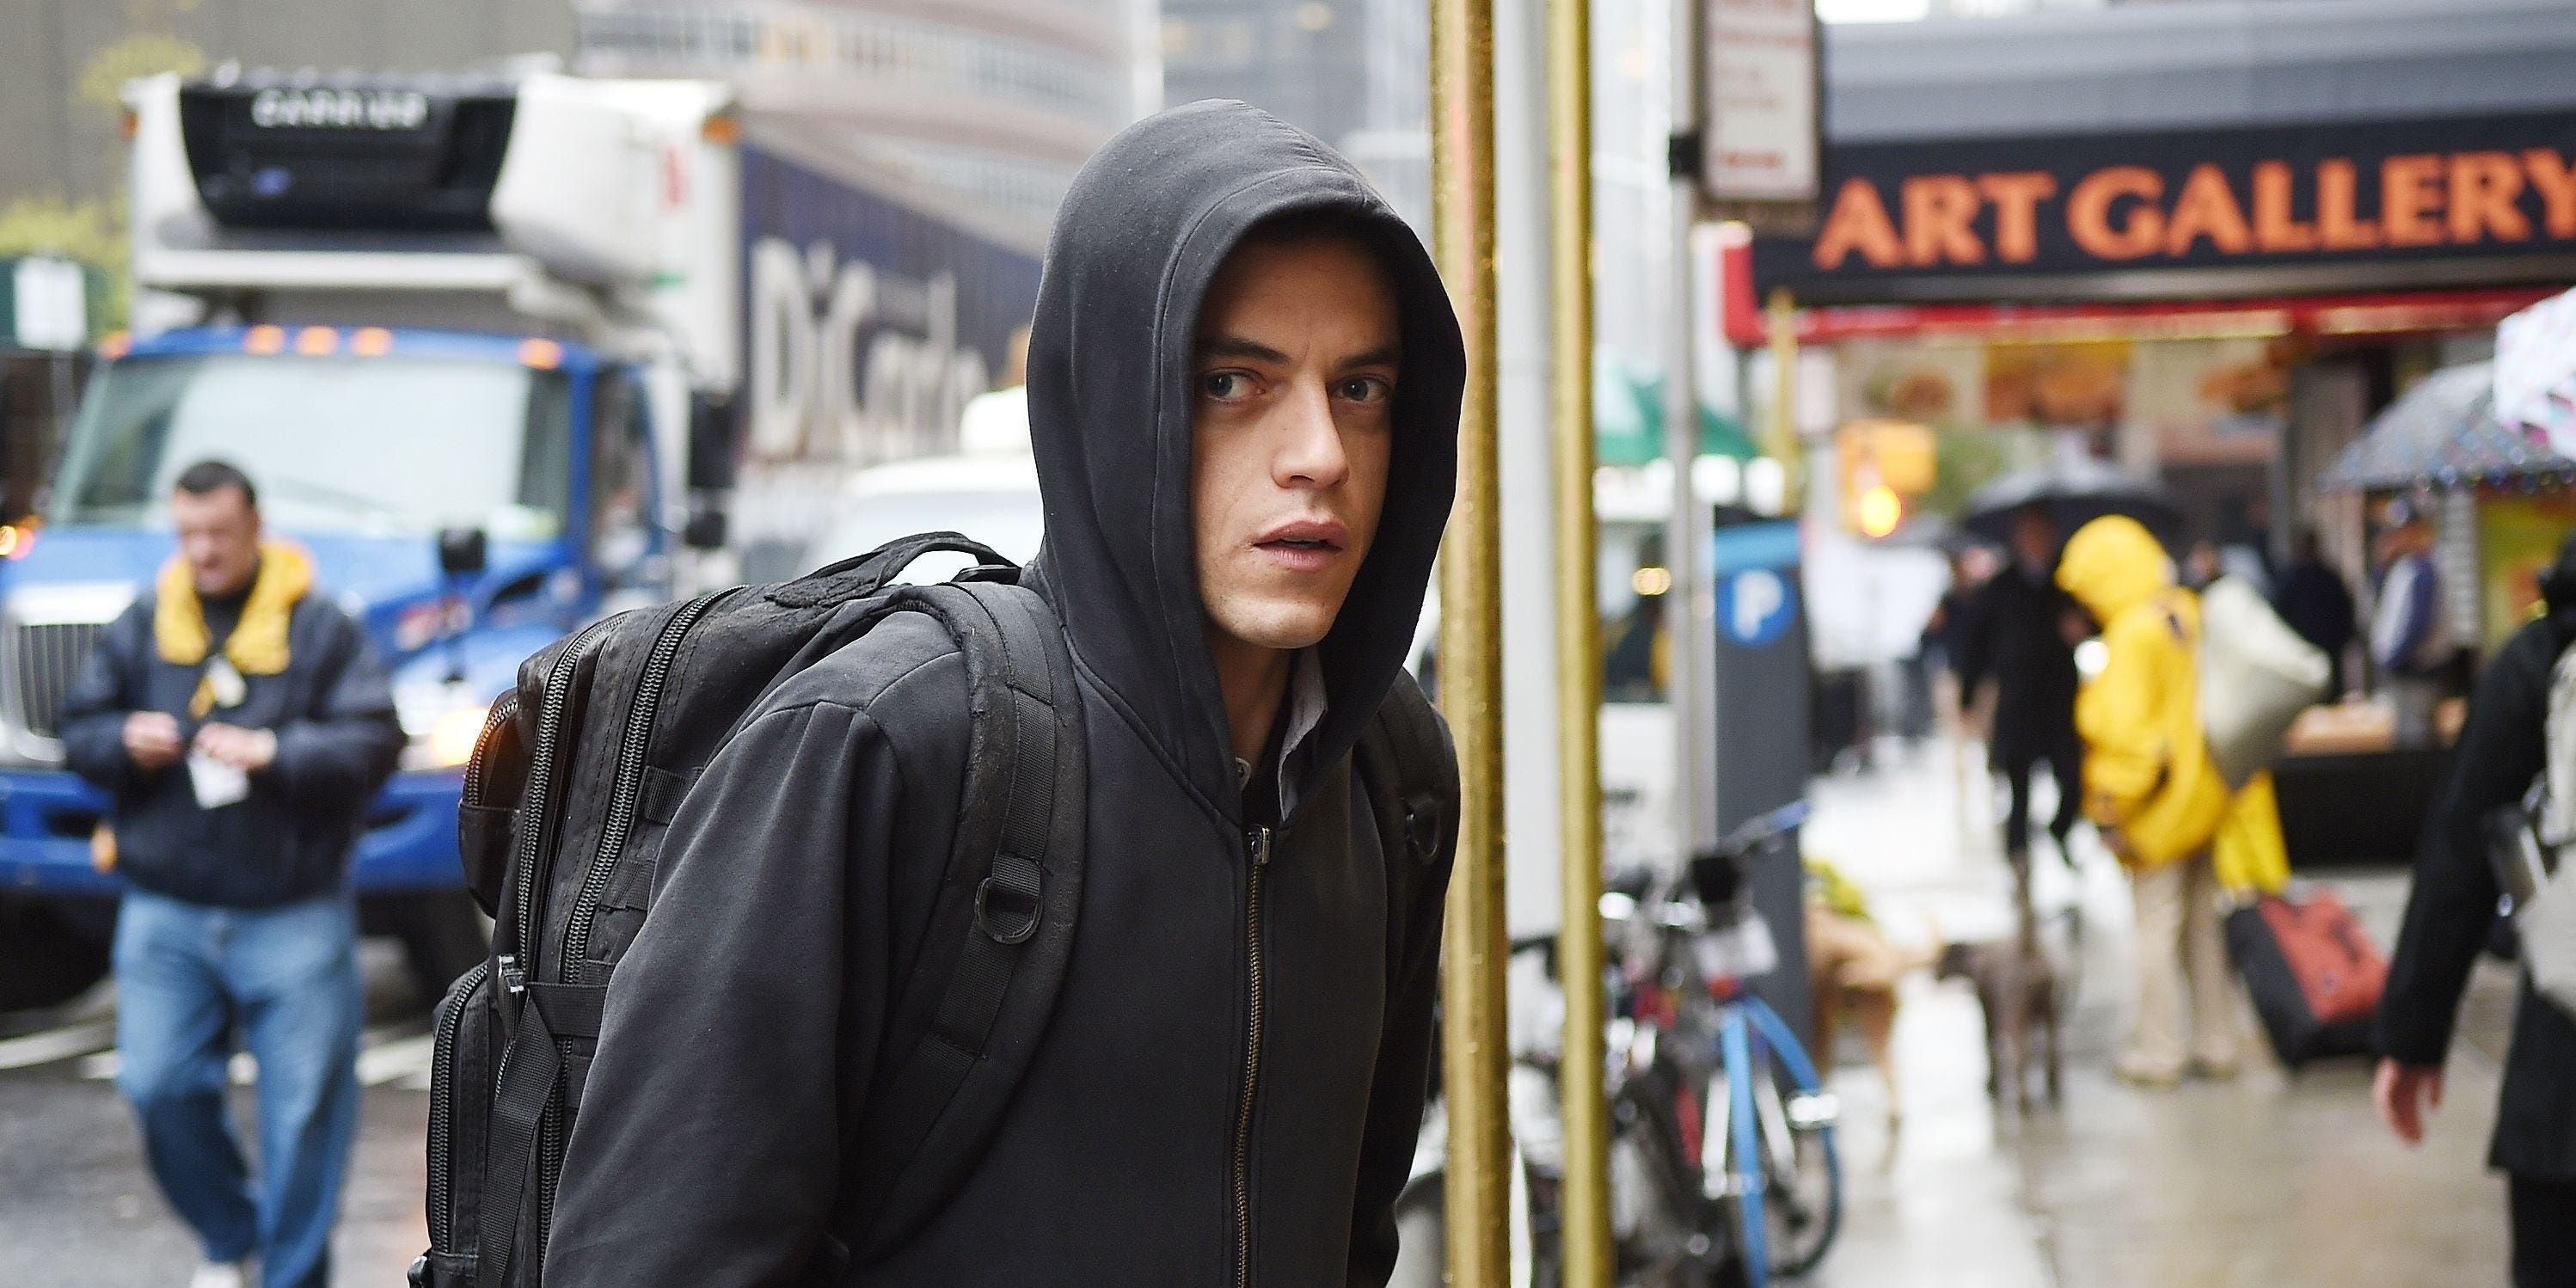 Elliot Alderson In Mr Robot standing in the street with his hood up